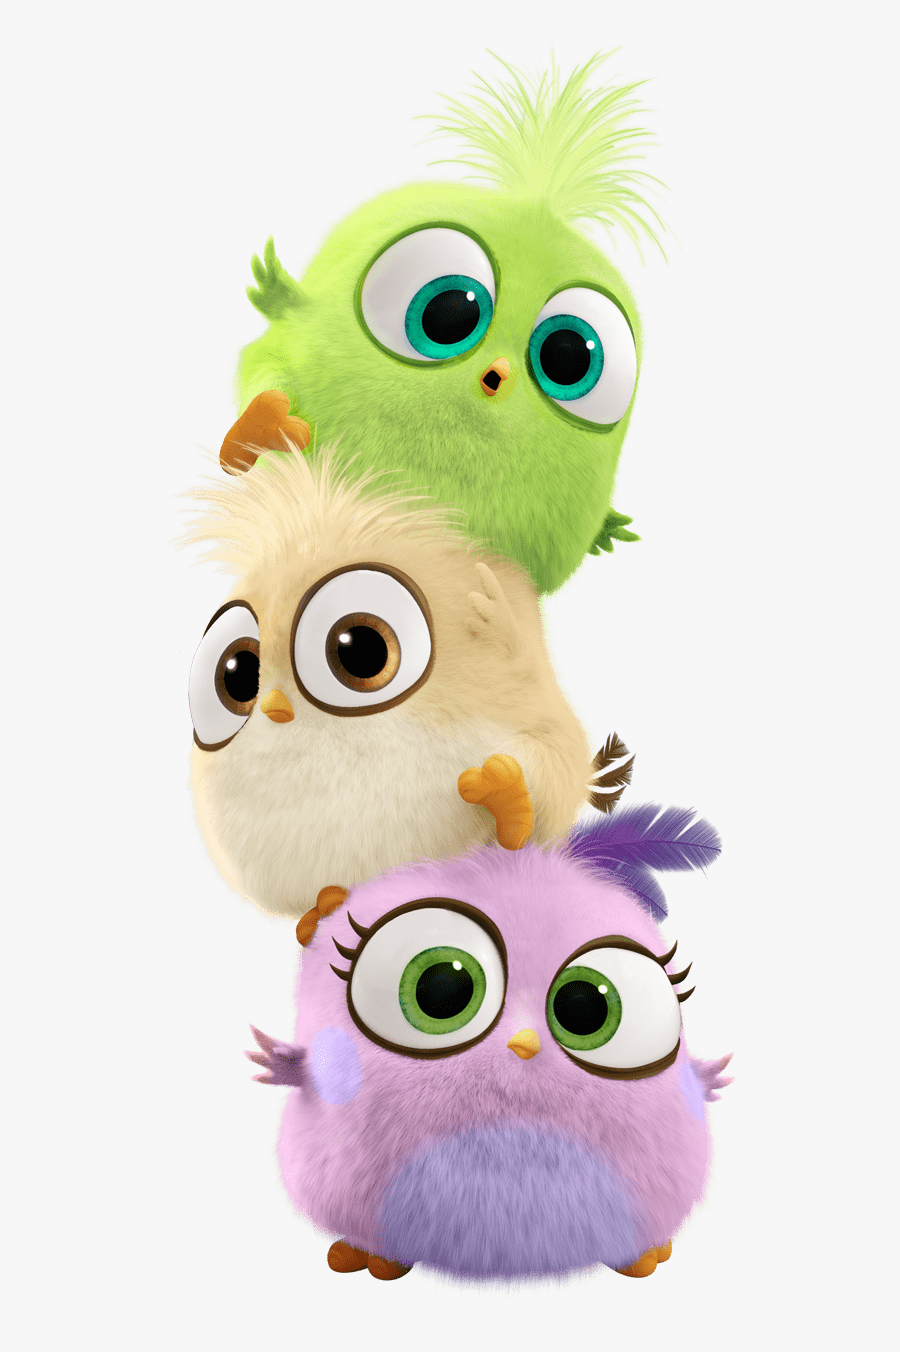 Cute Angry Birds Hd, Transparent Clipart